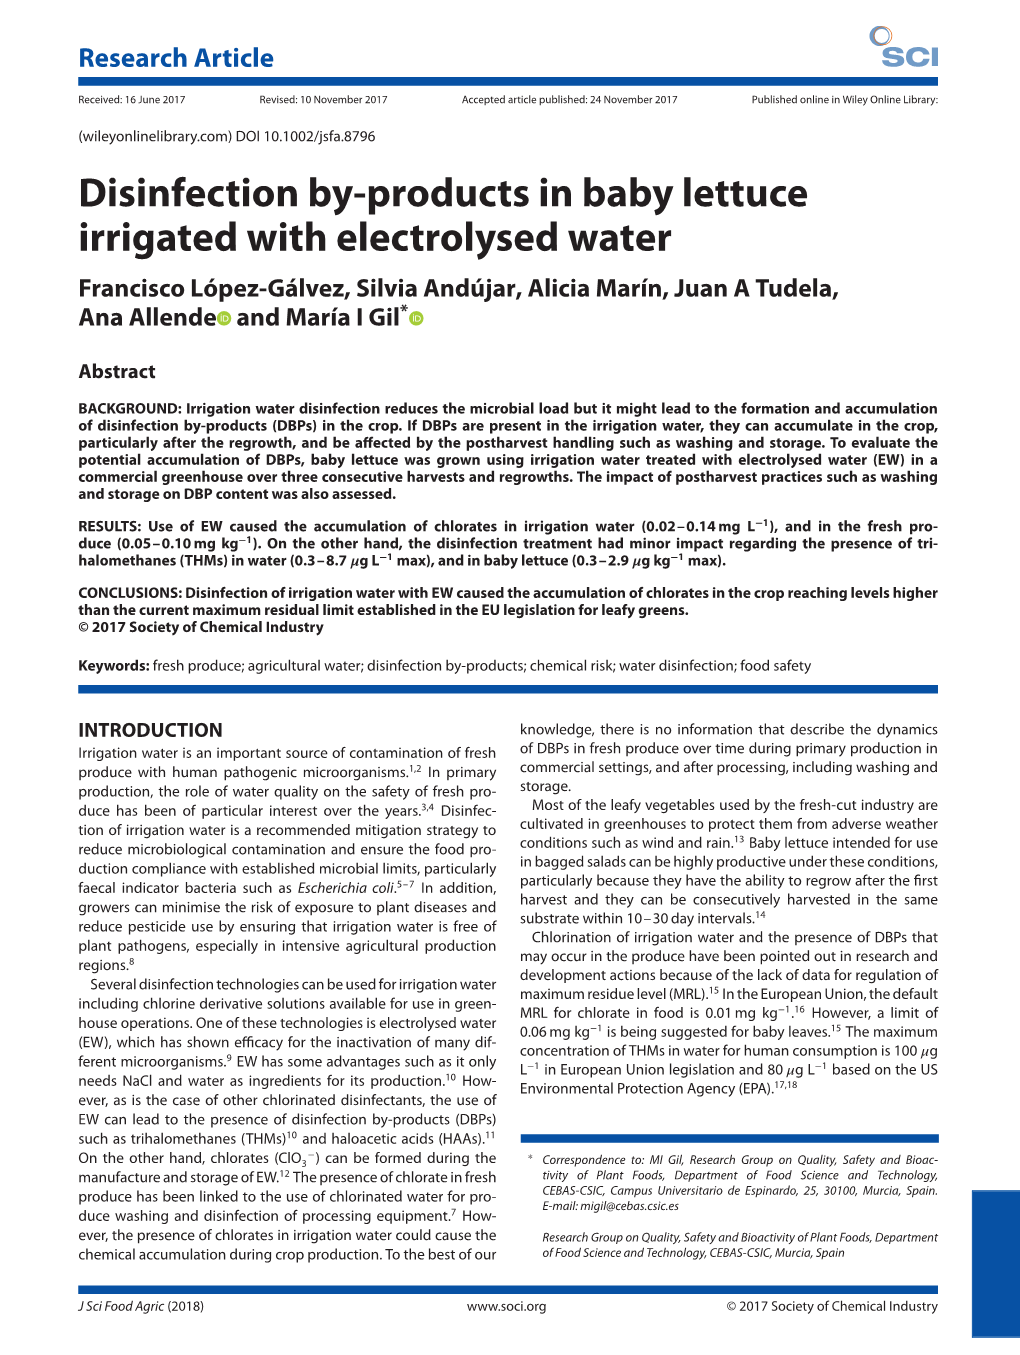 Disinfection By-Products in Baby Lettuce Irrigated with Electrolyzed Water